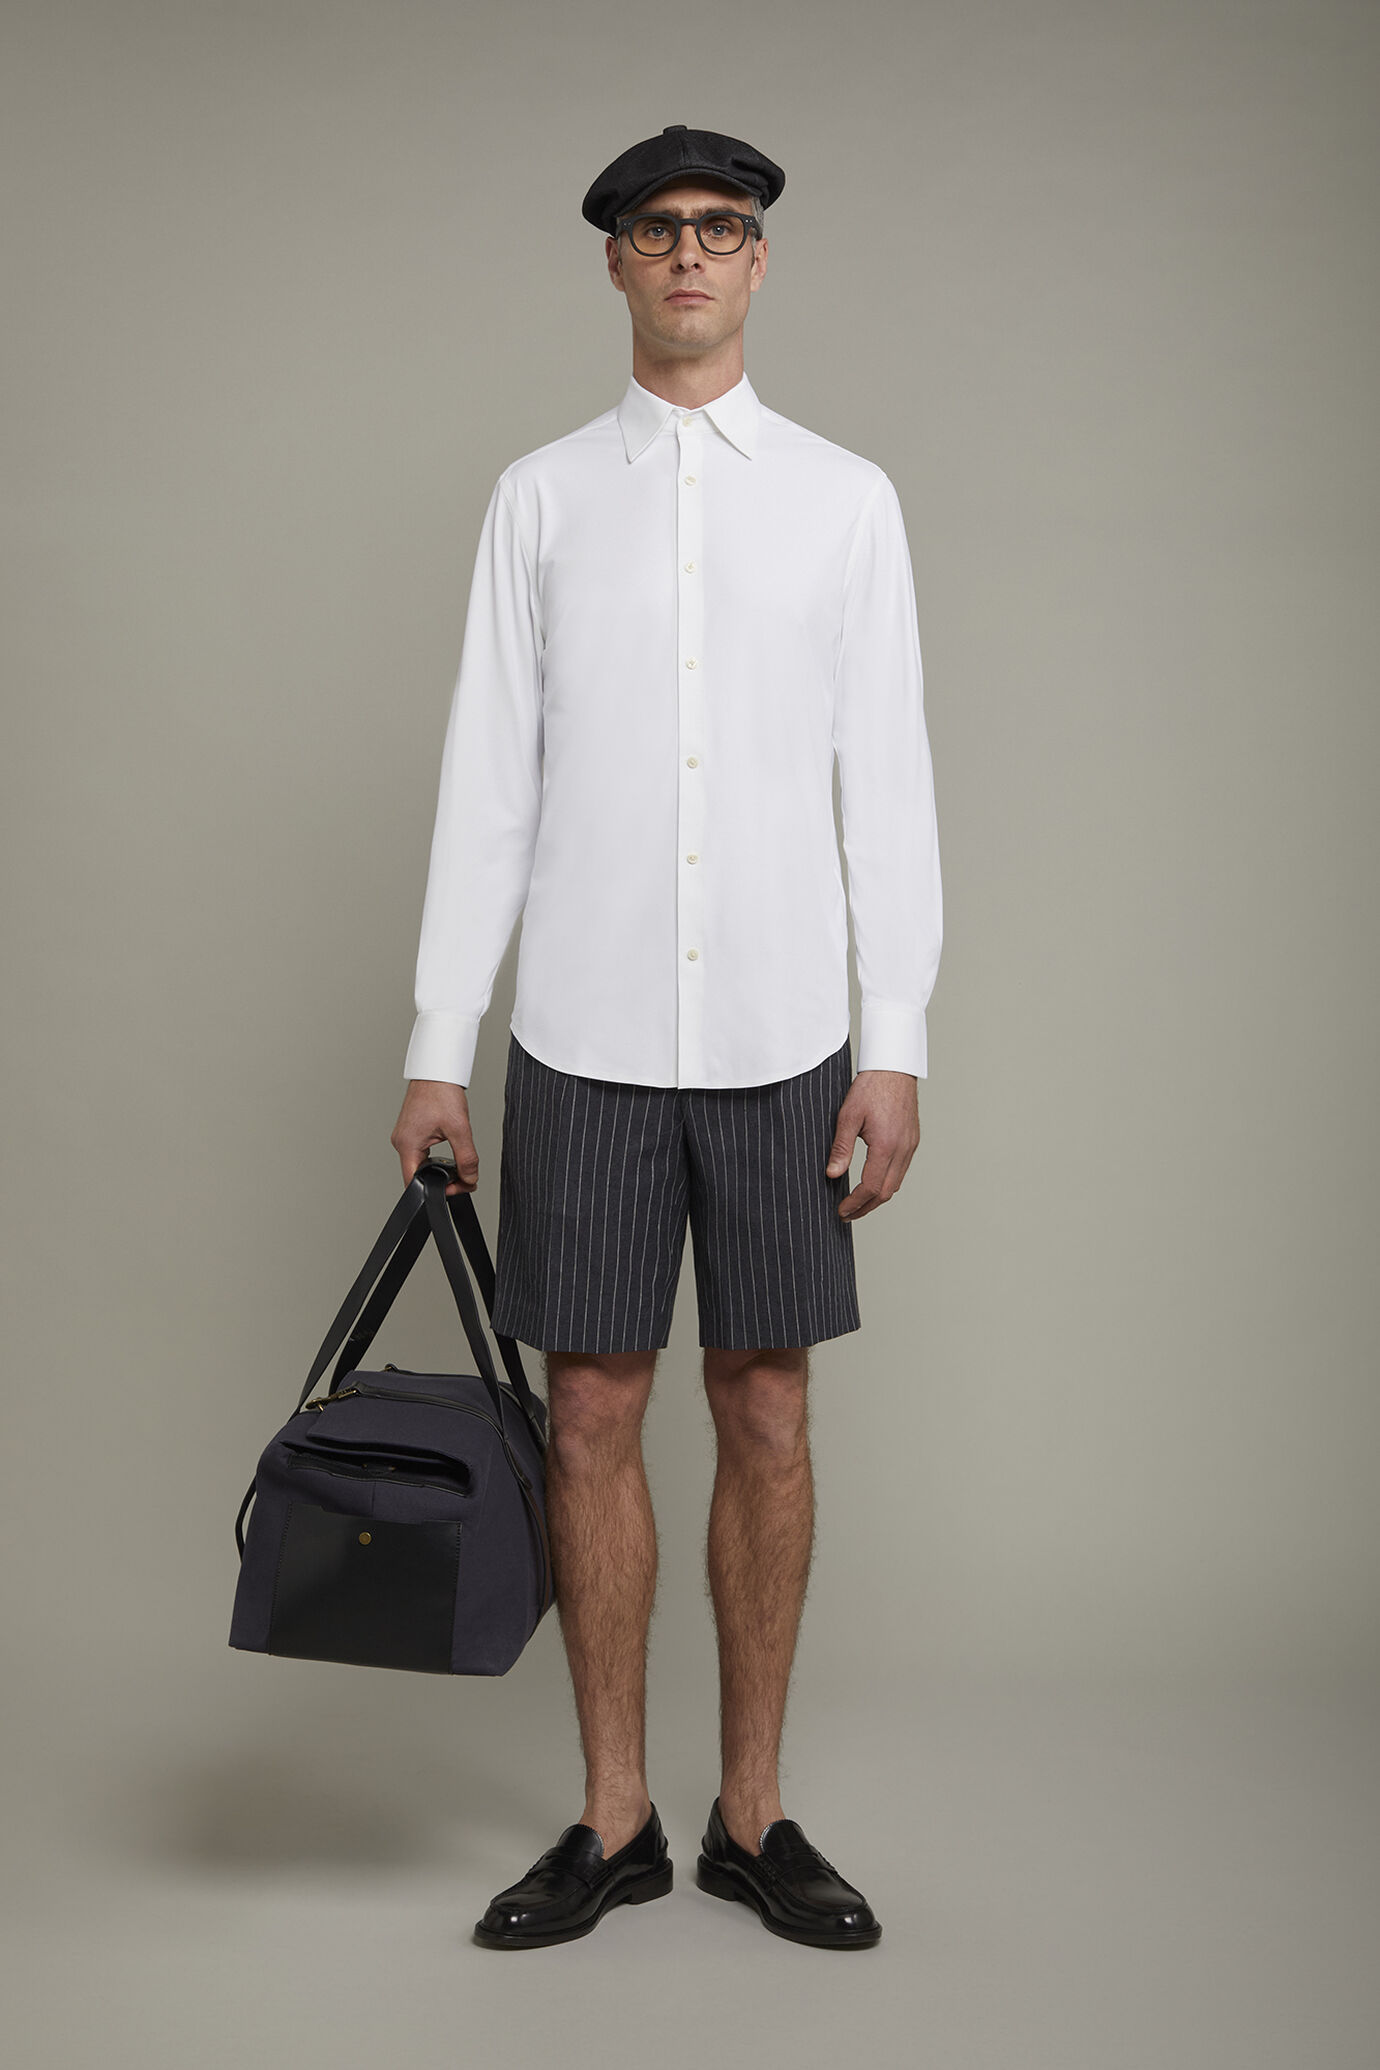 Men's double pinces bermuda in linen and cotton with pinstripe design regular fit